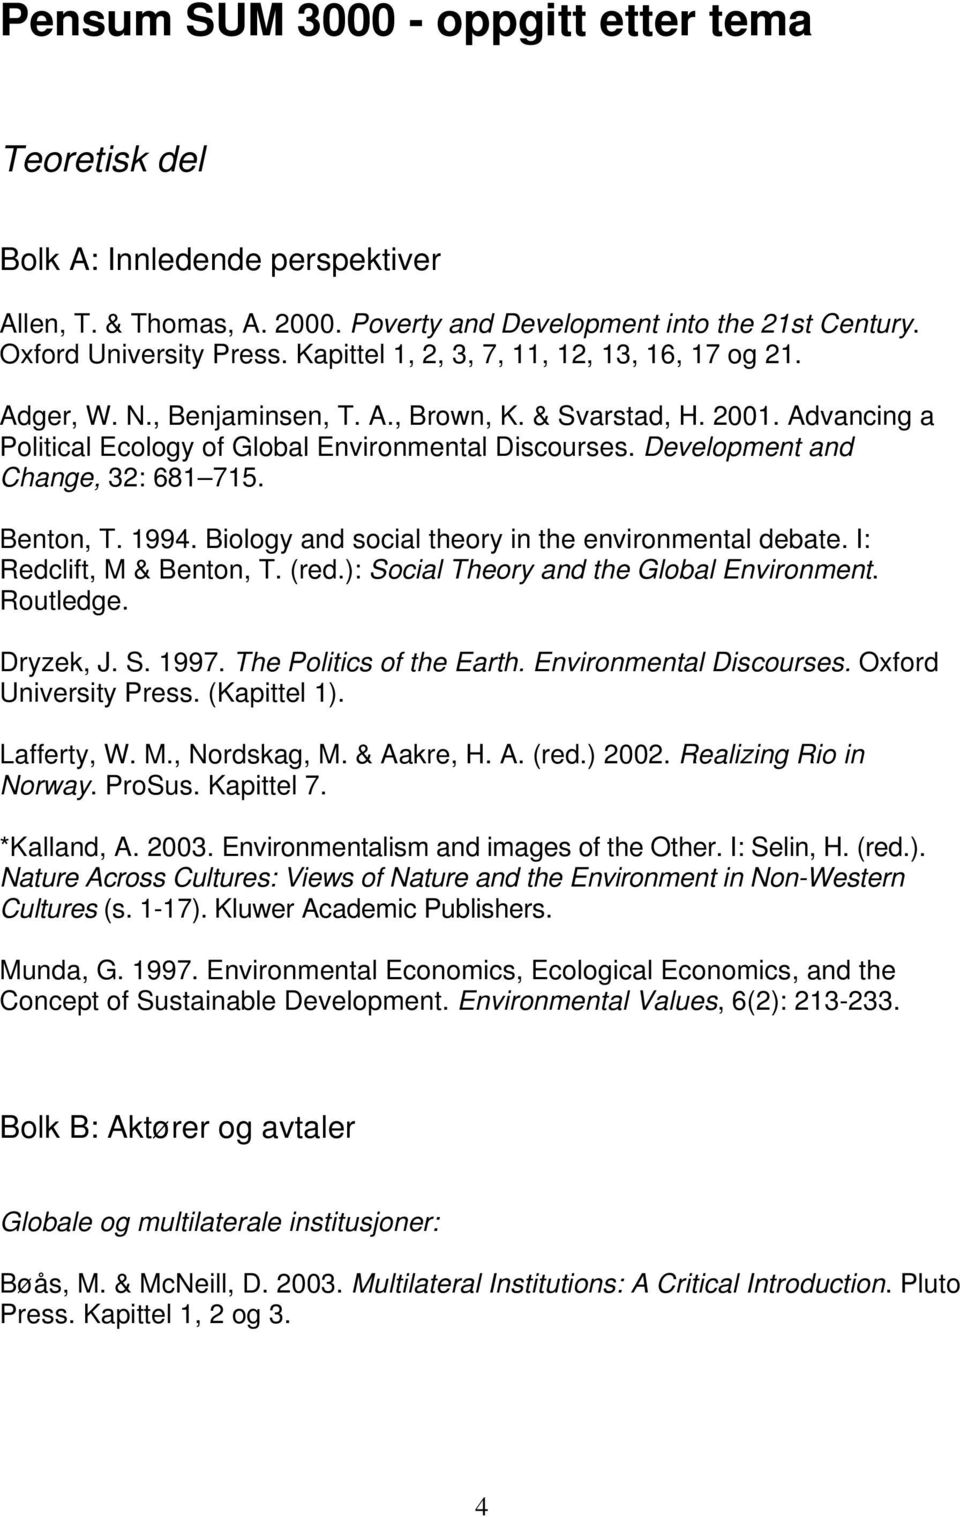 Development and Change, 32: 681 715. Benton, T. 1994. Biology and social theory in the environmental debate. I: Redclift, M & Benton, T. (red.): Social Theory and the Global Environment. Dryzek, J. S. 1997.